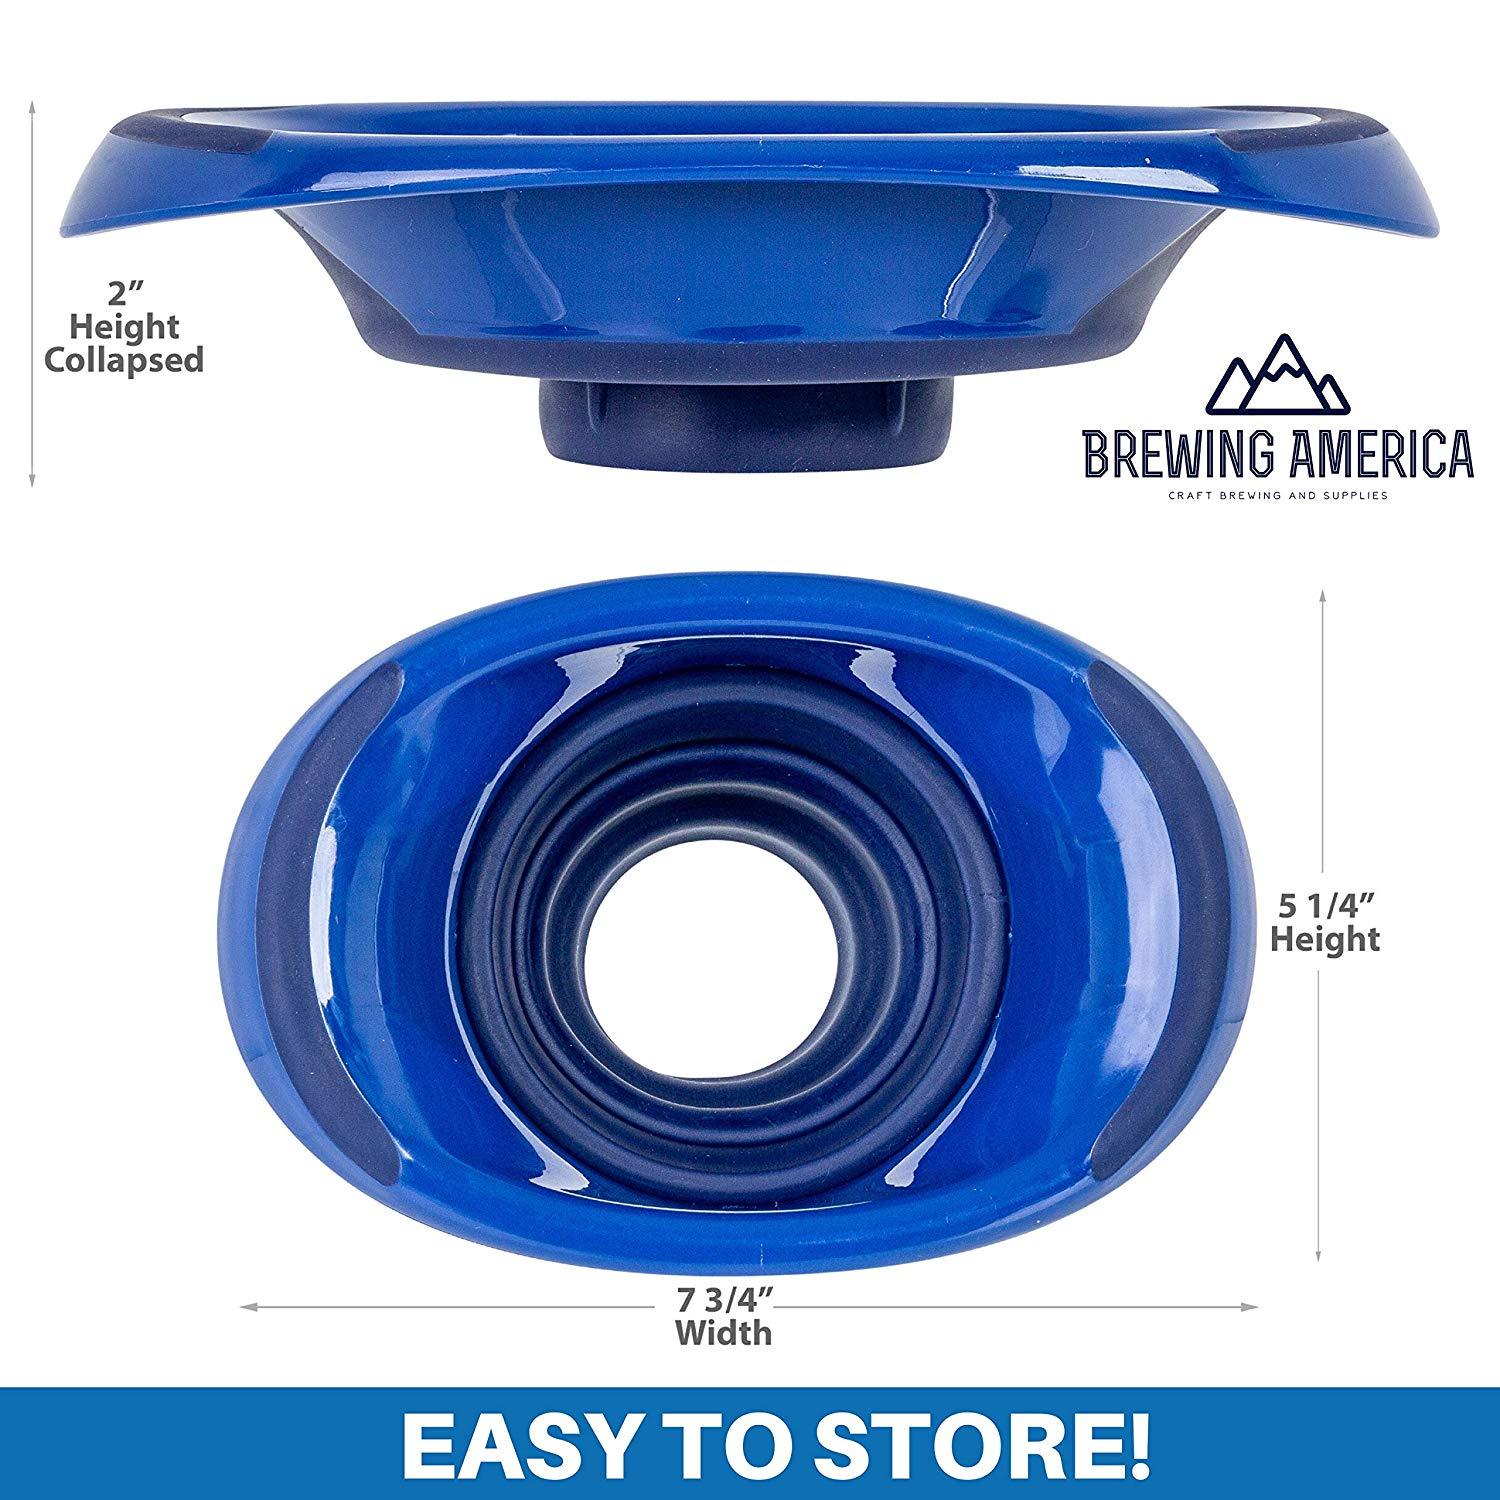 Kitchen Canning Funnel - Wide Mouth Mason Jars Collapsible Silicone for Food, Coffee, Jams, Fruit, Crafts - Blue Accessories Brewing America 